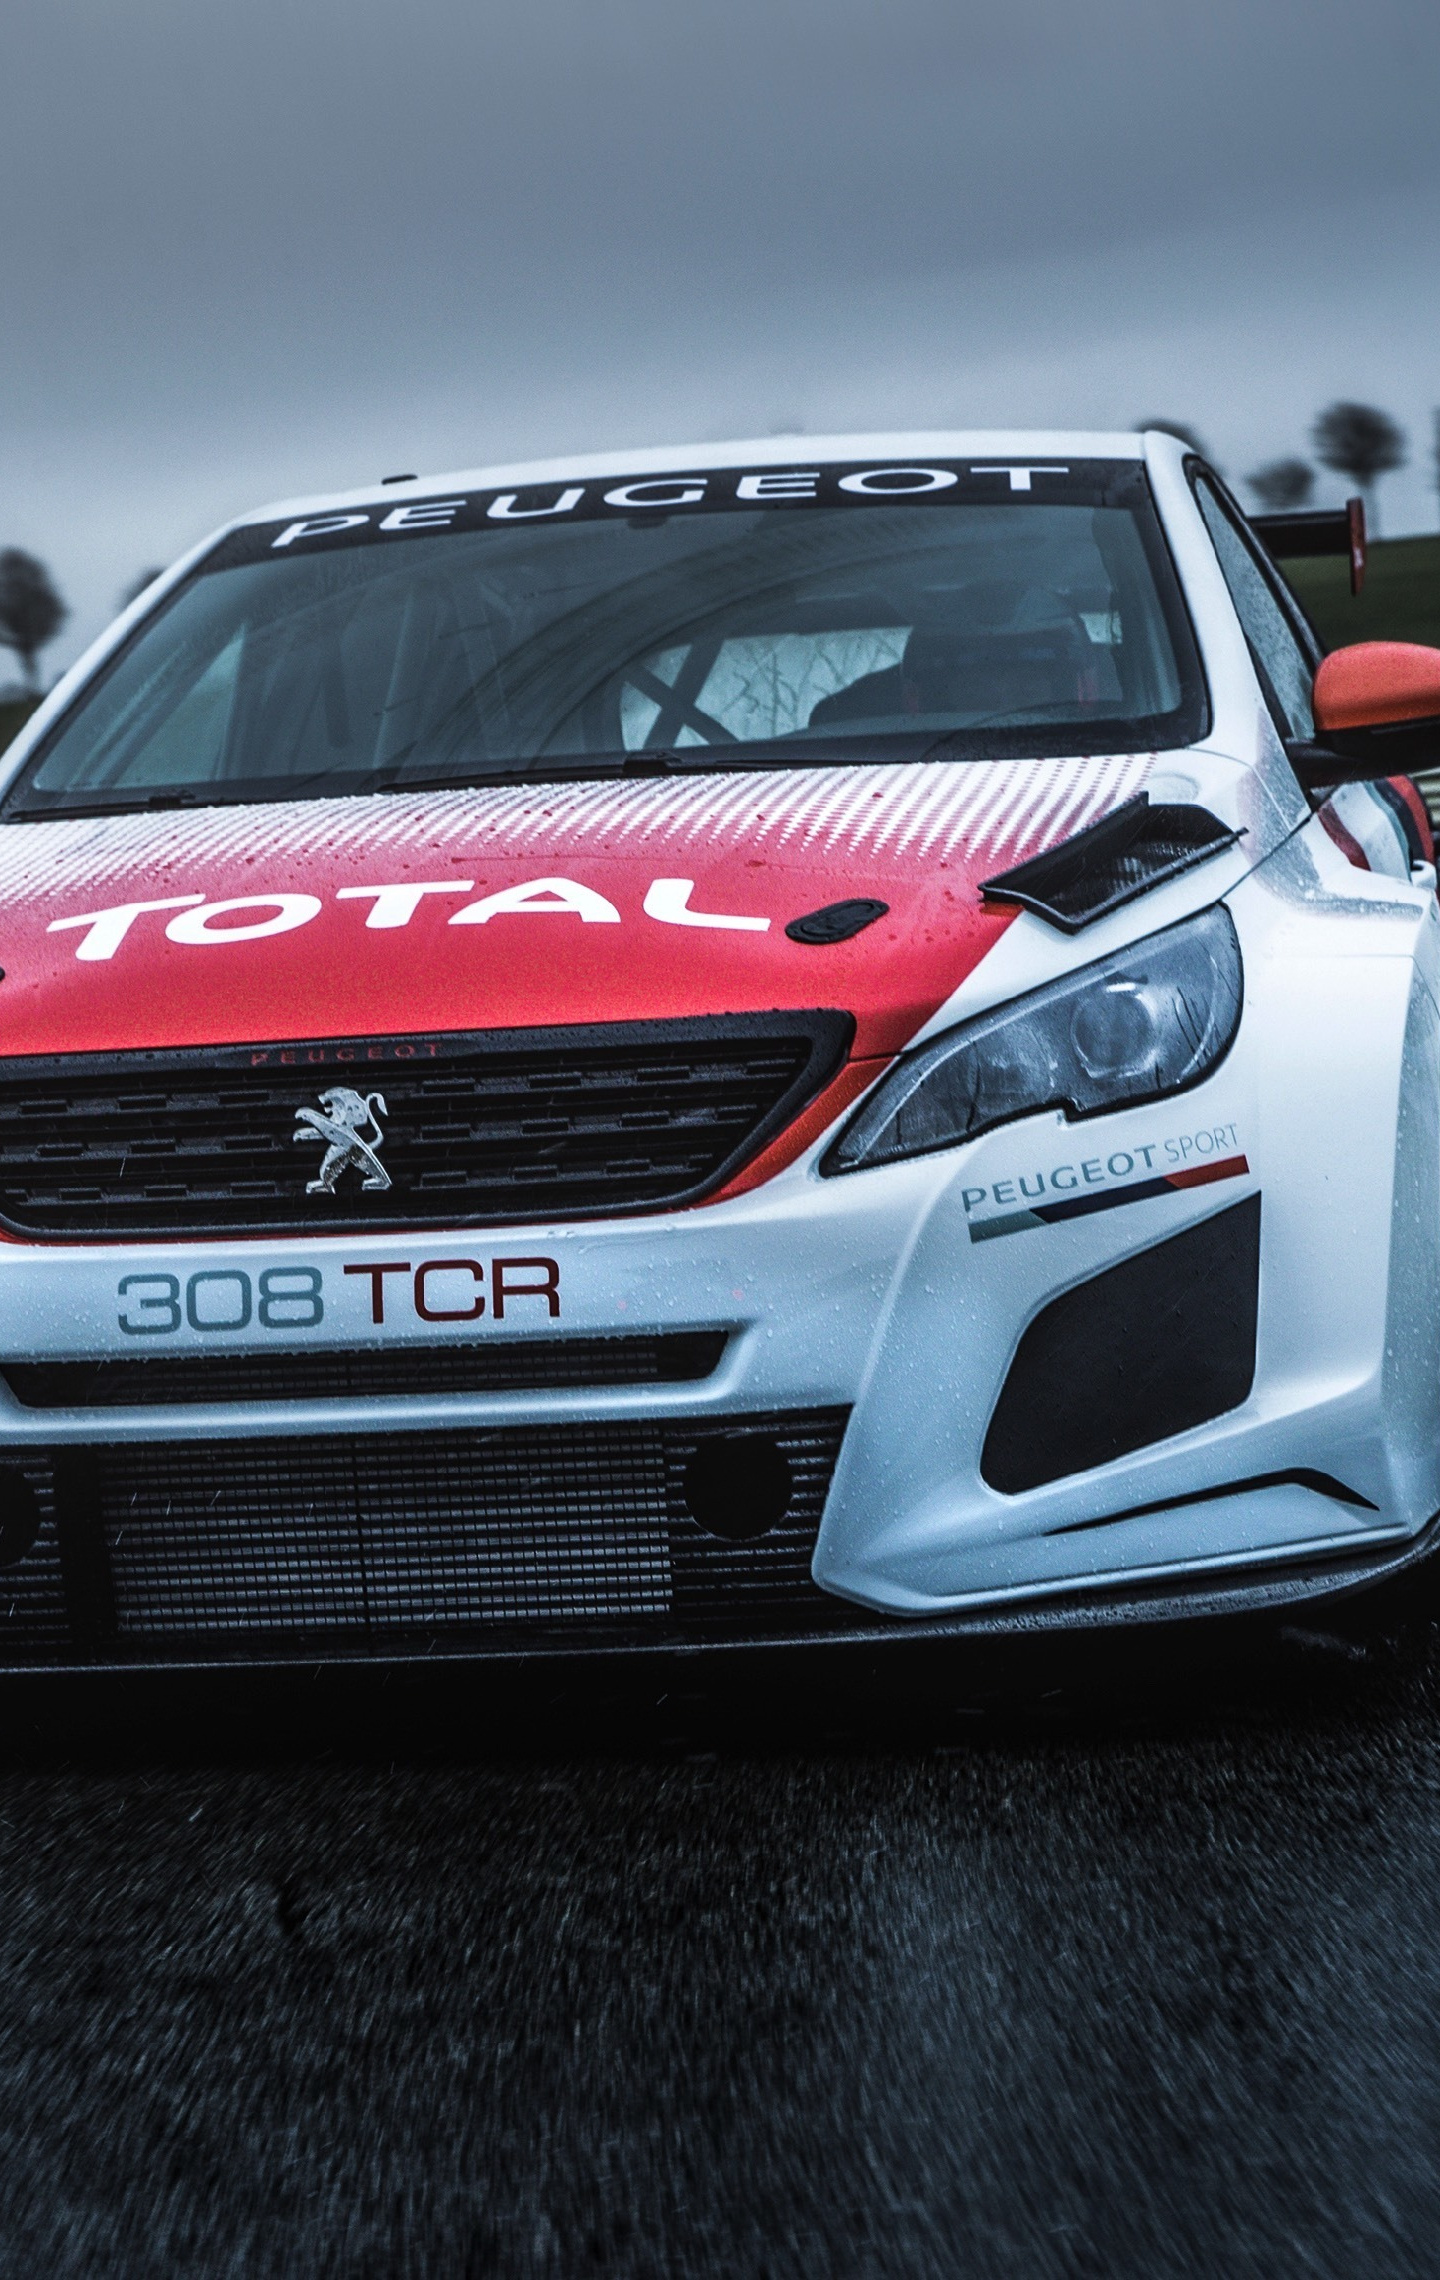 Peugeot 308 TCR, Front on road, Samsung Galaxy S8, HD image, 1440x2280 HD Handy